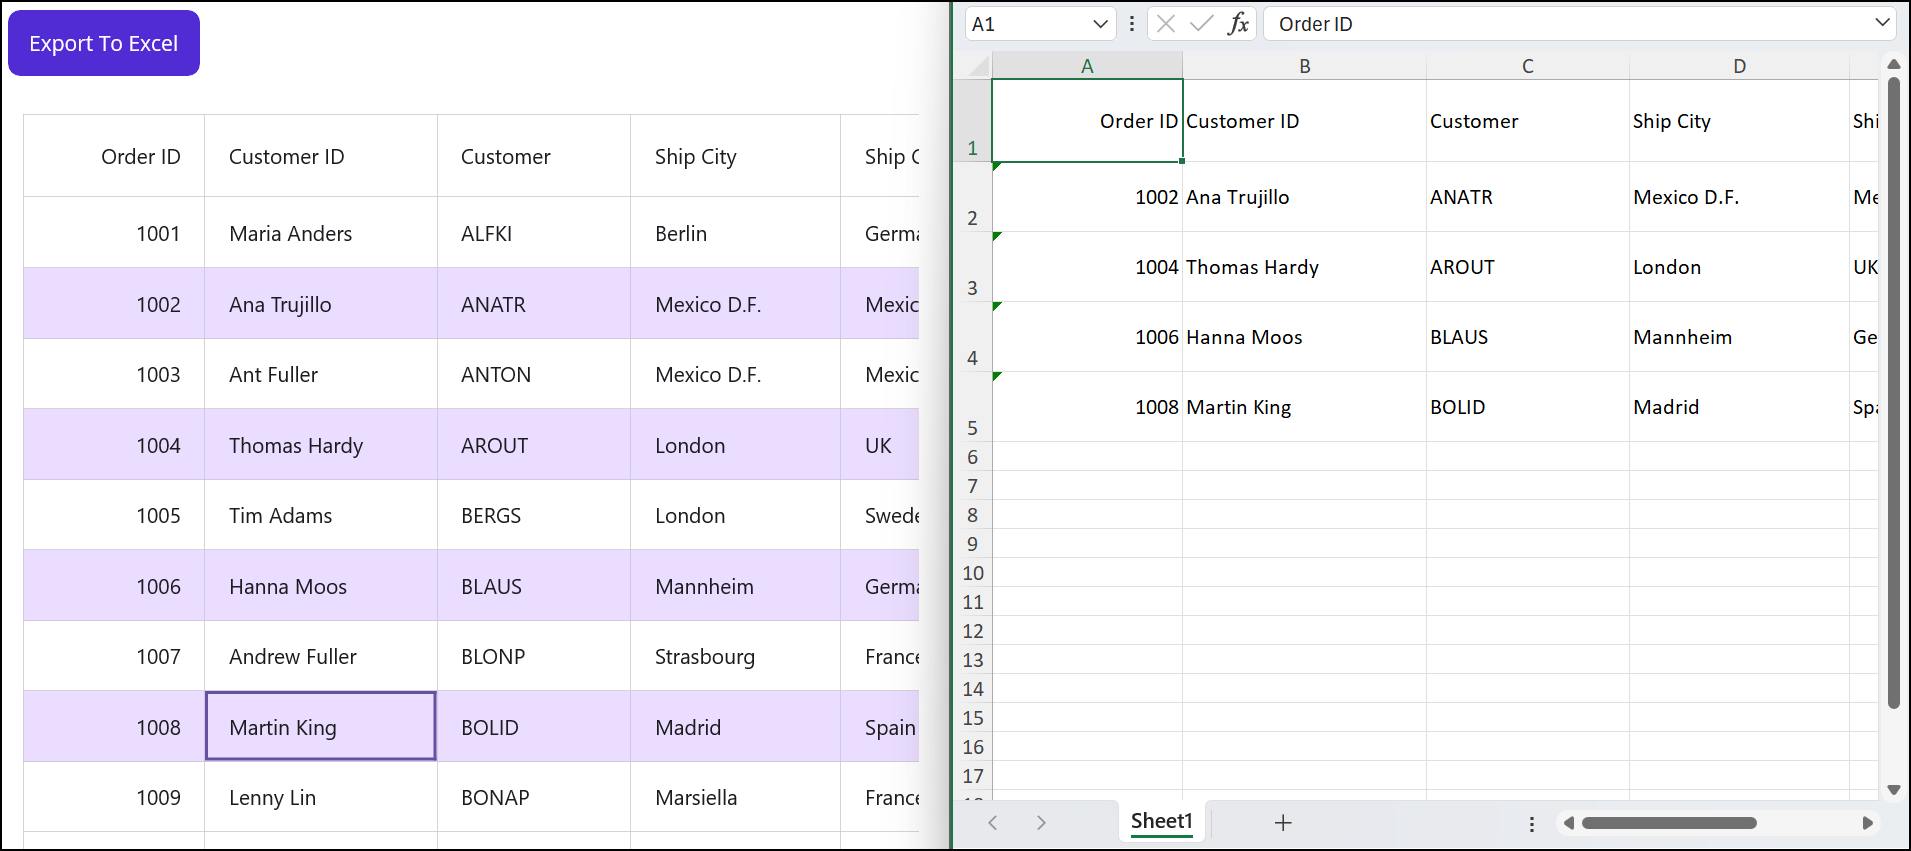 Exporting selected rows in a grid to an Excel sheet